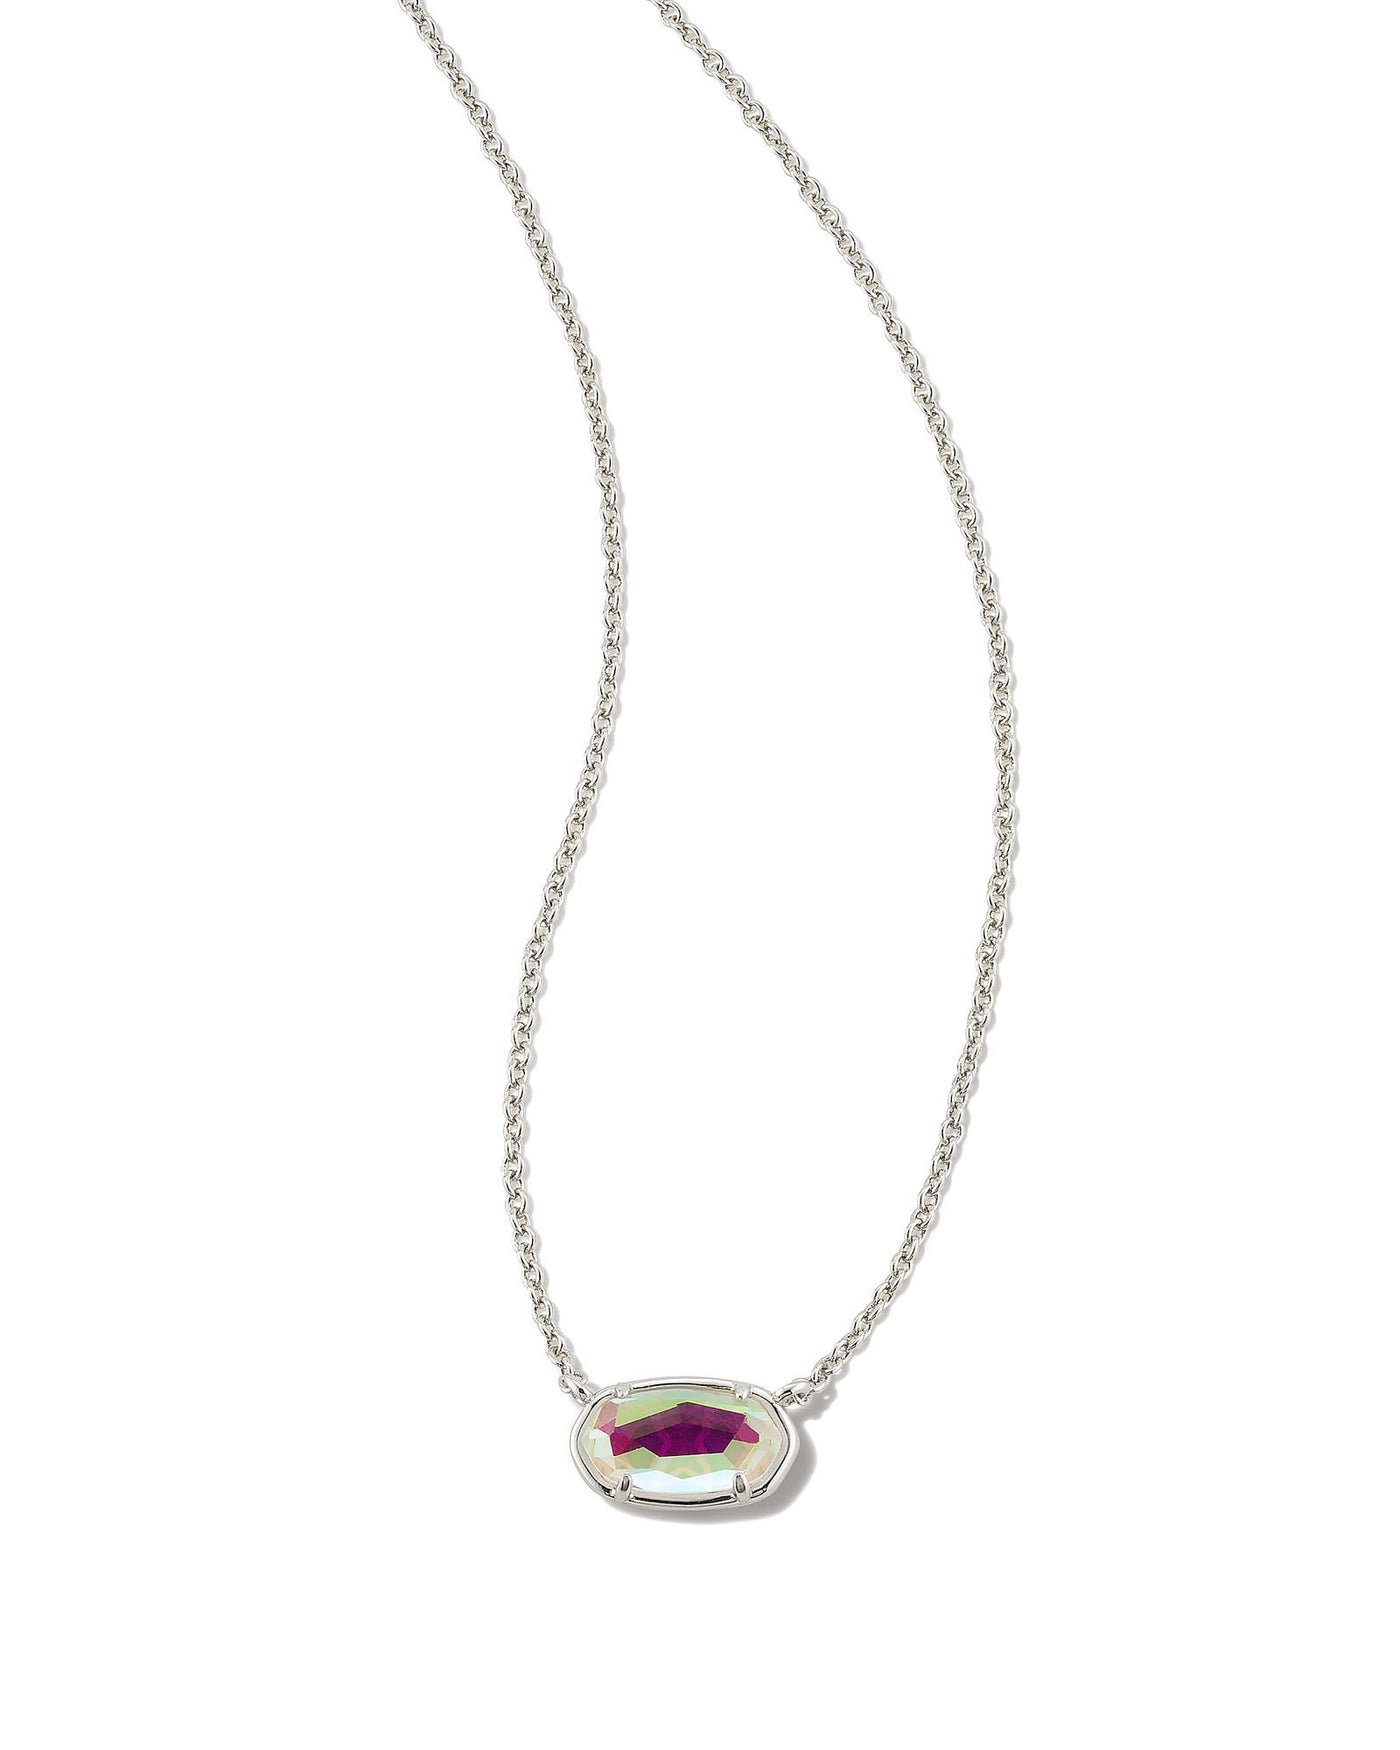 Kendra Scott Grayson Stone Pendant Necklace Silver Dichroic Glass-Necklaces-Kendra Scott-Market Street Nest, Fashionable Clothing, Shoes and Home Décor Located in Mabank, TX